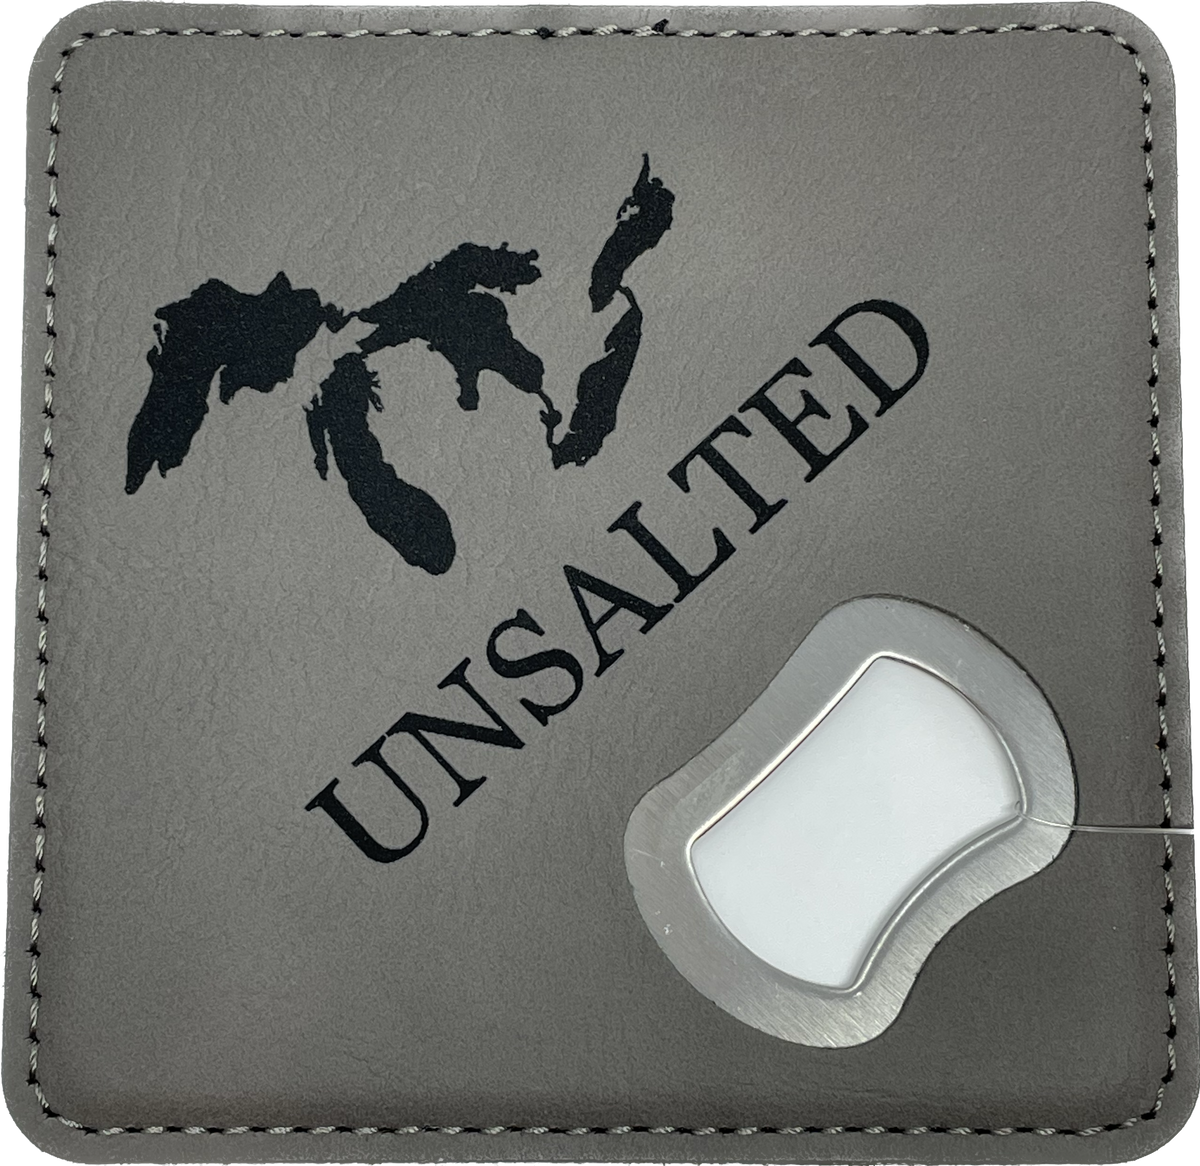 MI Great Lakes Unsalted Leather Coaster/Bottle Opener